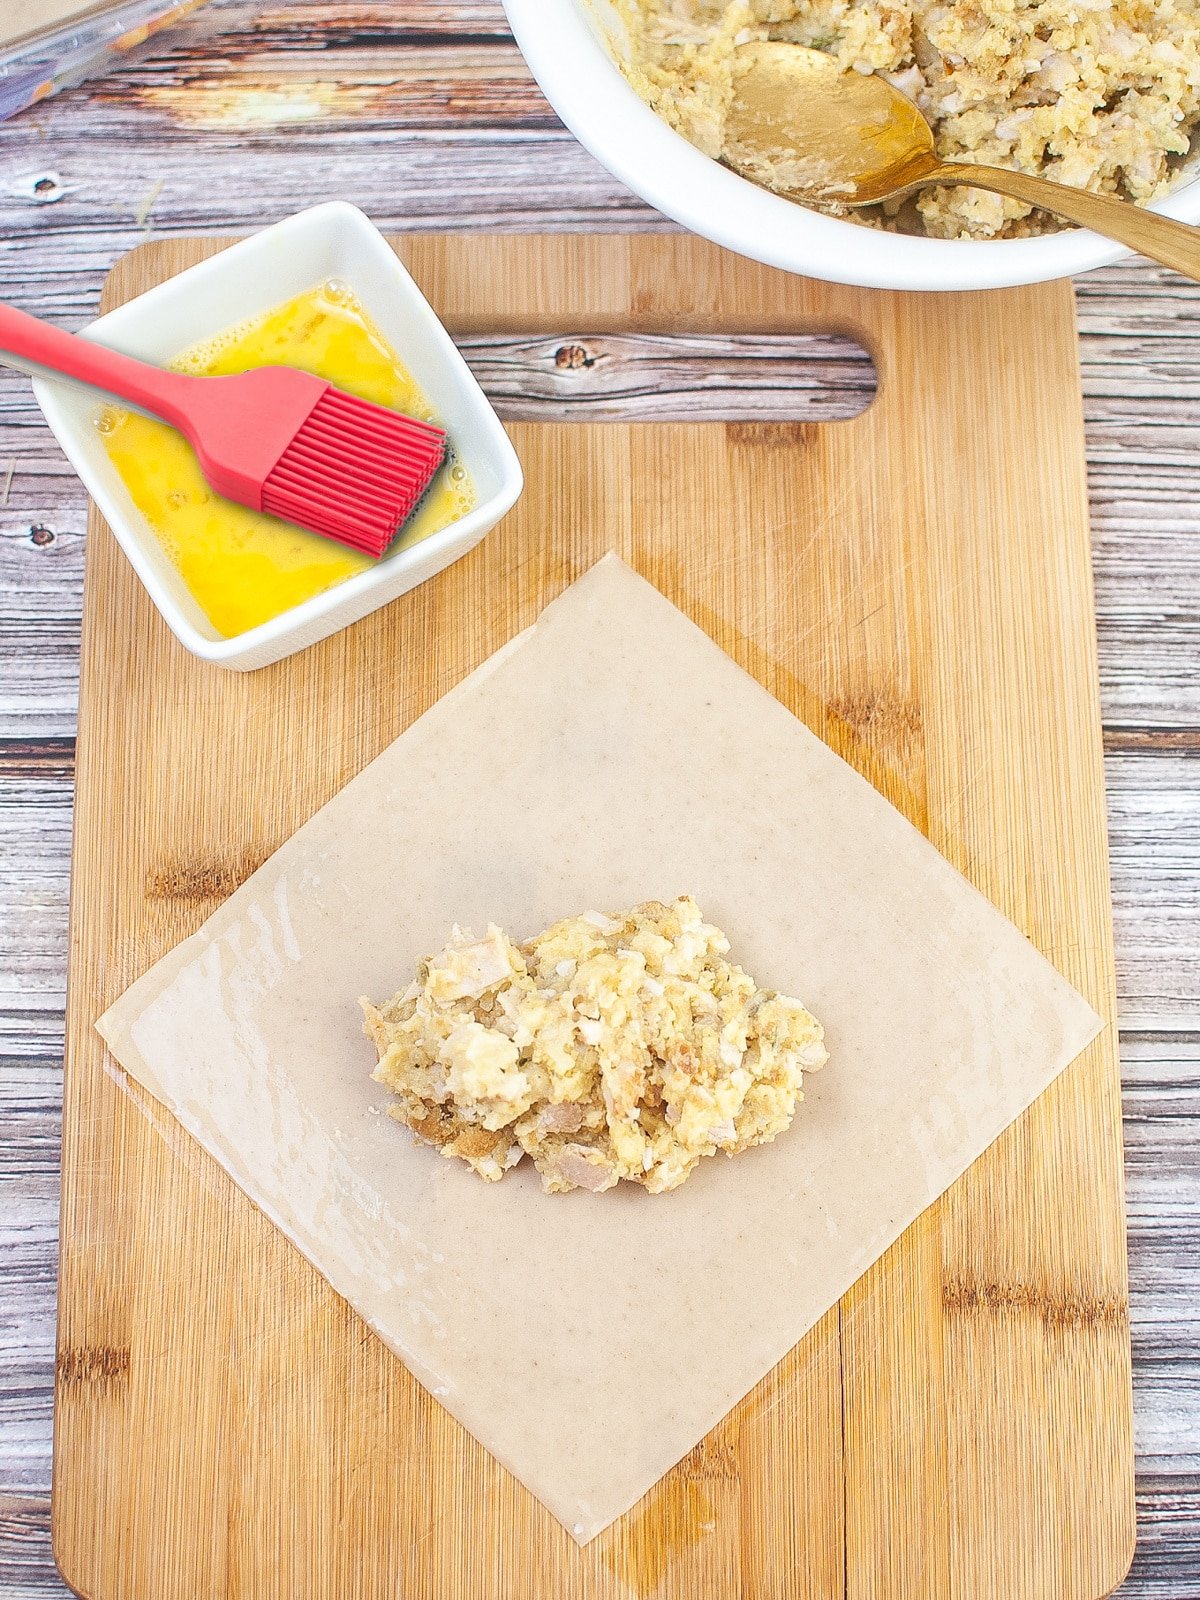 A wooden cutting board with a filled egg roll wrapper next to a bowl of egg wash.